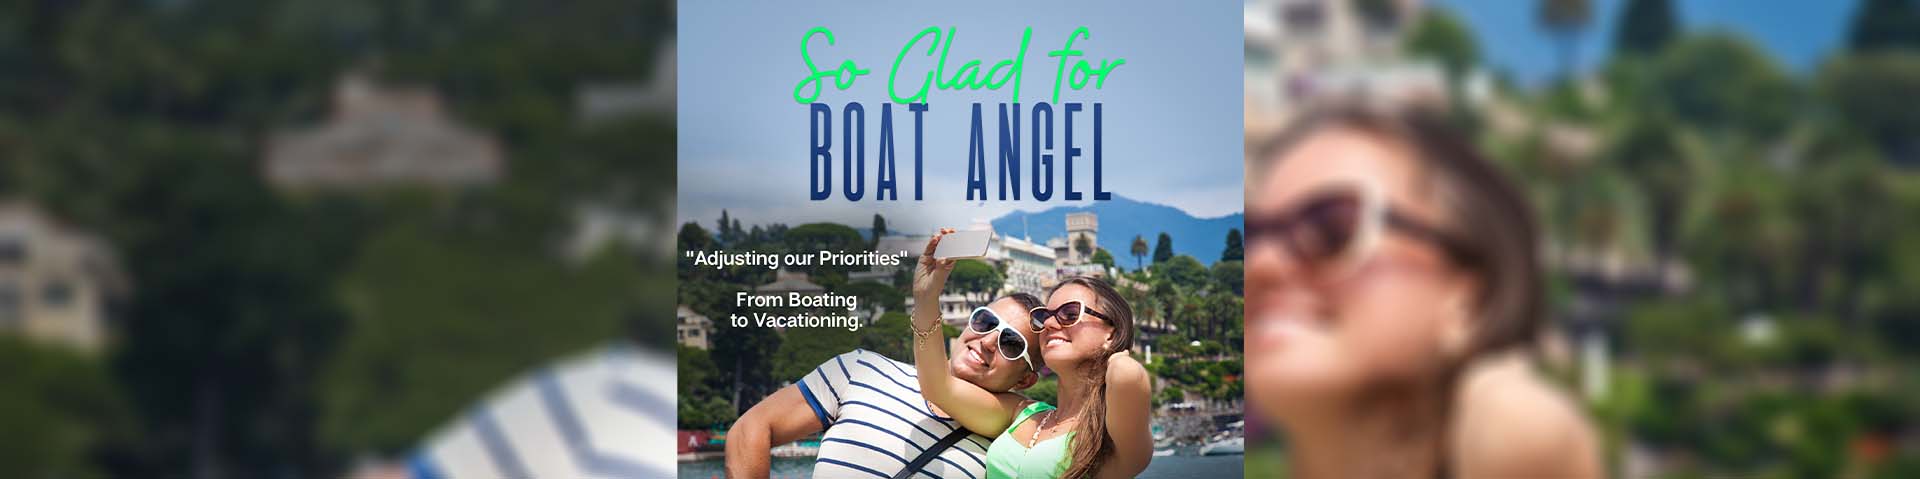 So Glad for Boat Angel - Young Couple Taking a Selfie during Vacation - Text says 'Adjusting our Priorities' from Boat to Vacationing.'